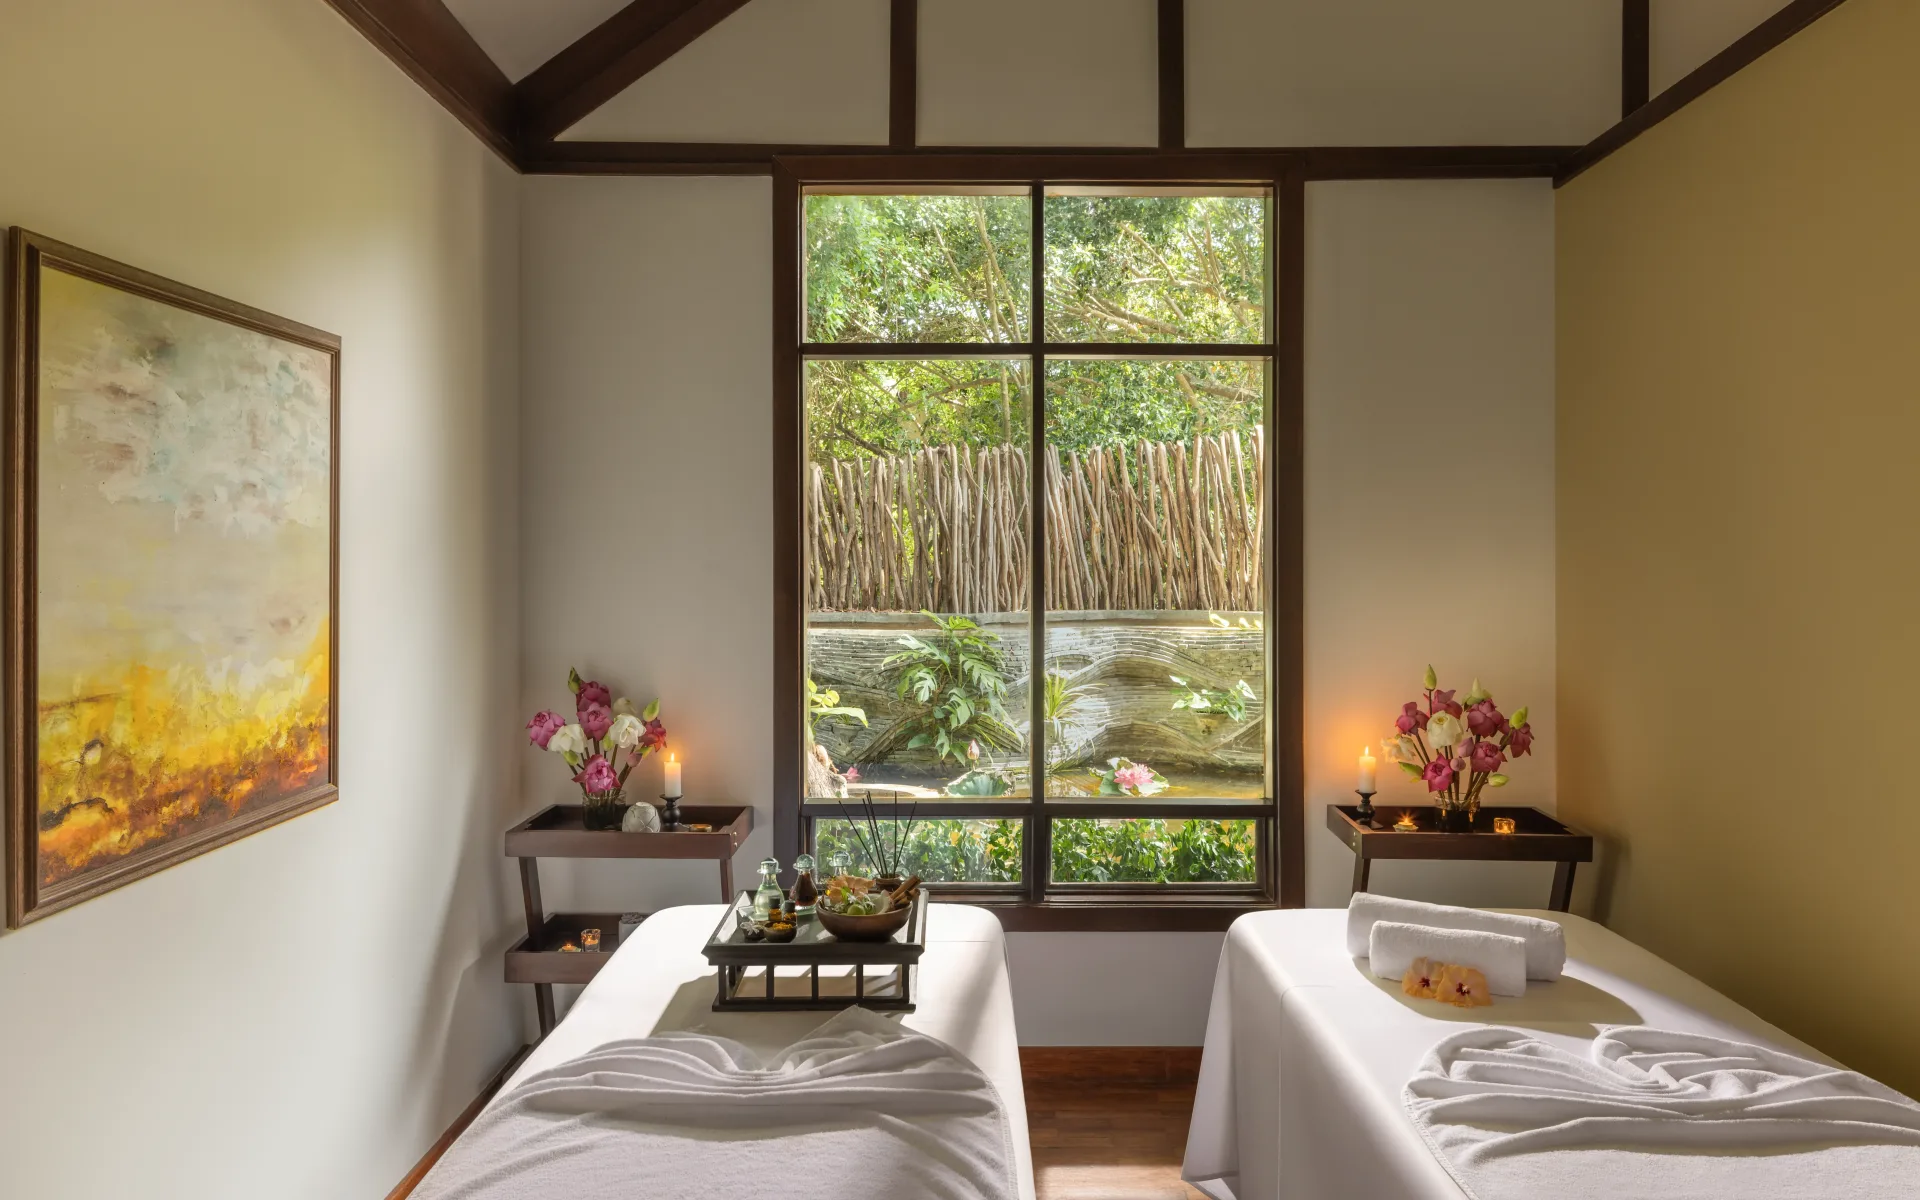 Two massage beds lay in a cosy room. A large window on-looks the surrounding jungle.